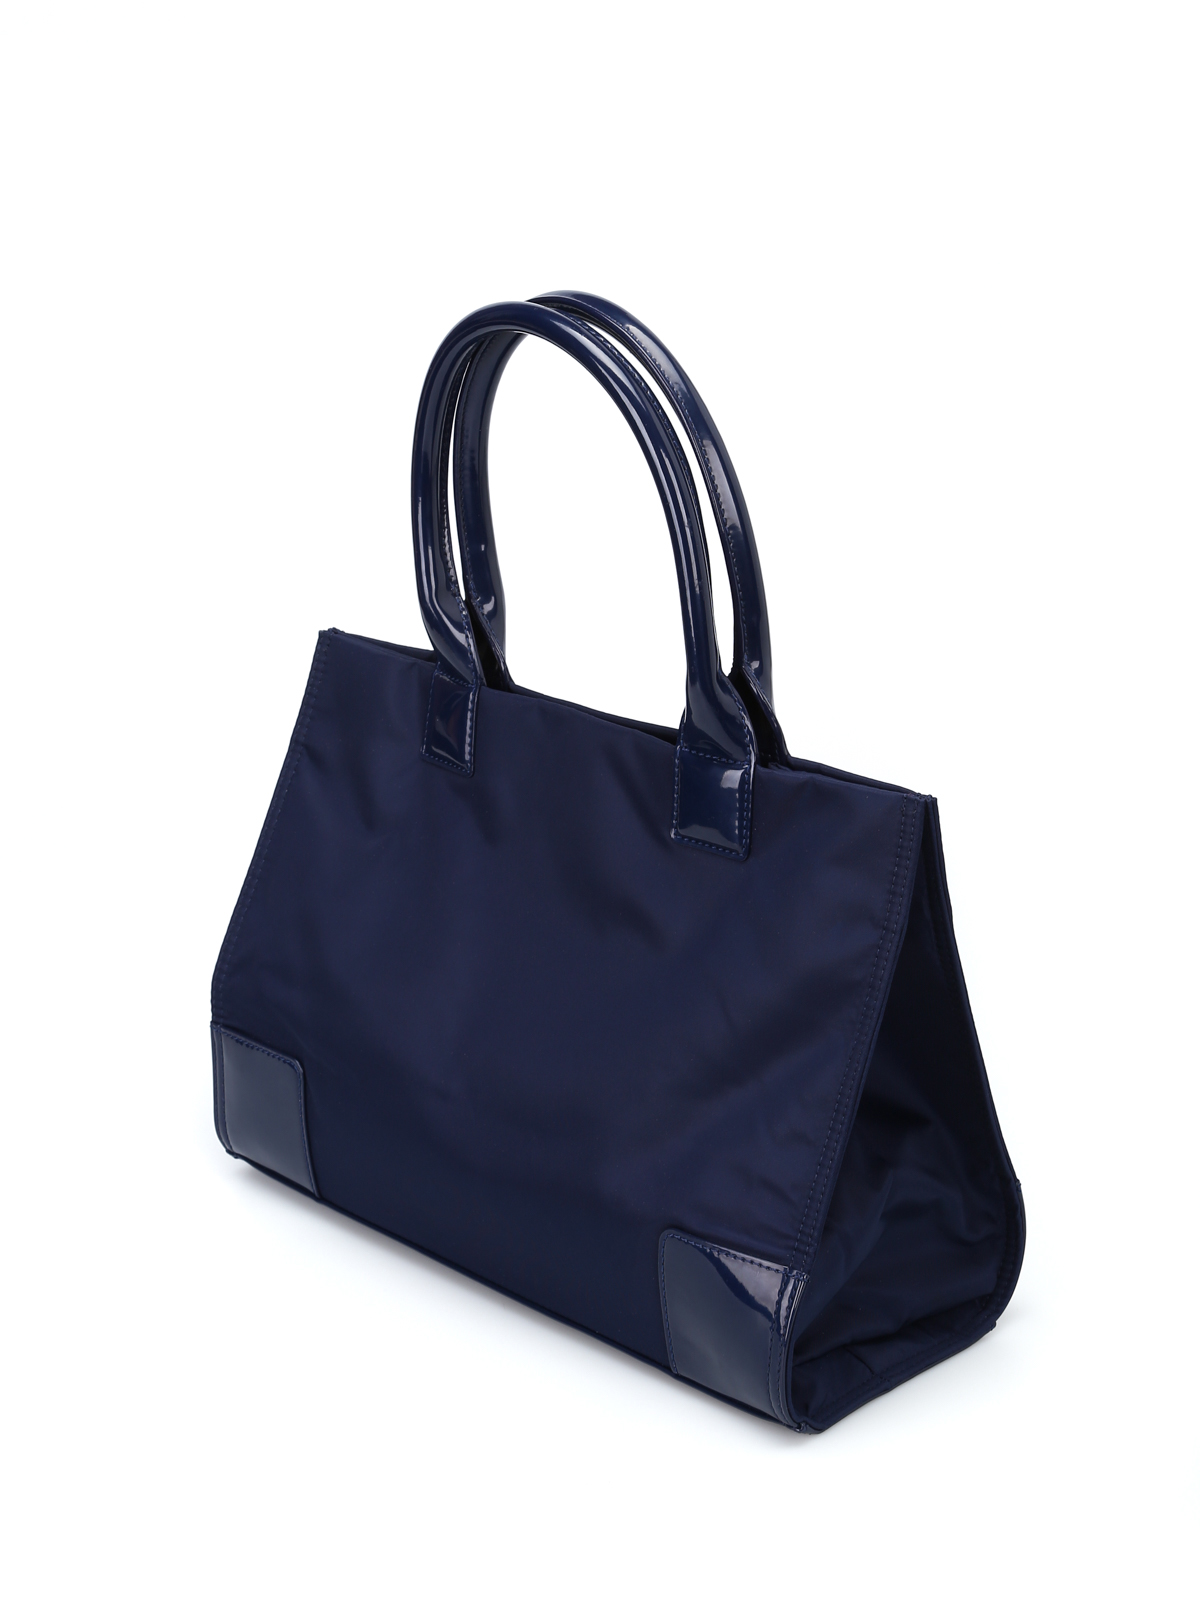 Tory Burch Navy Blue Nylon And Patent Leather Ella Tote Tory Burch